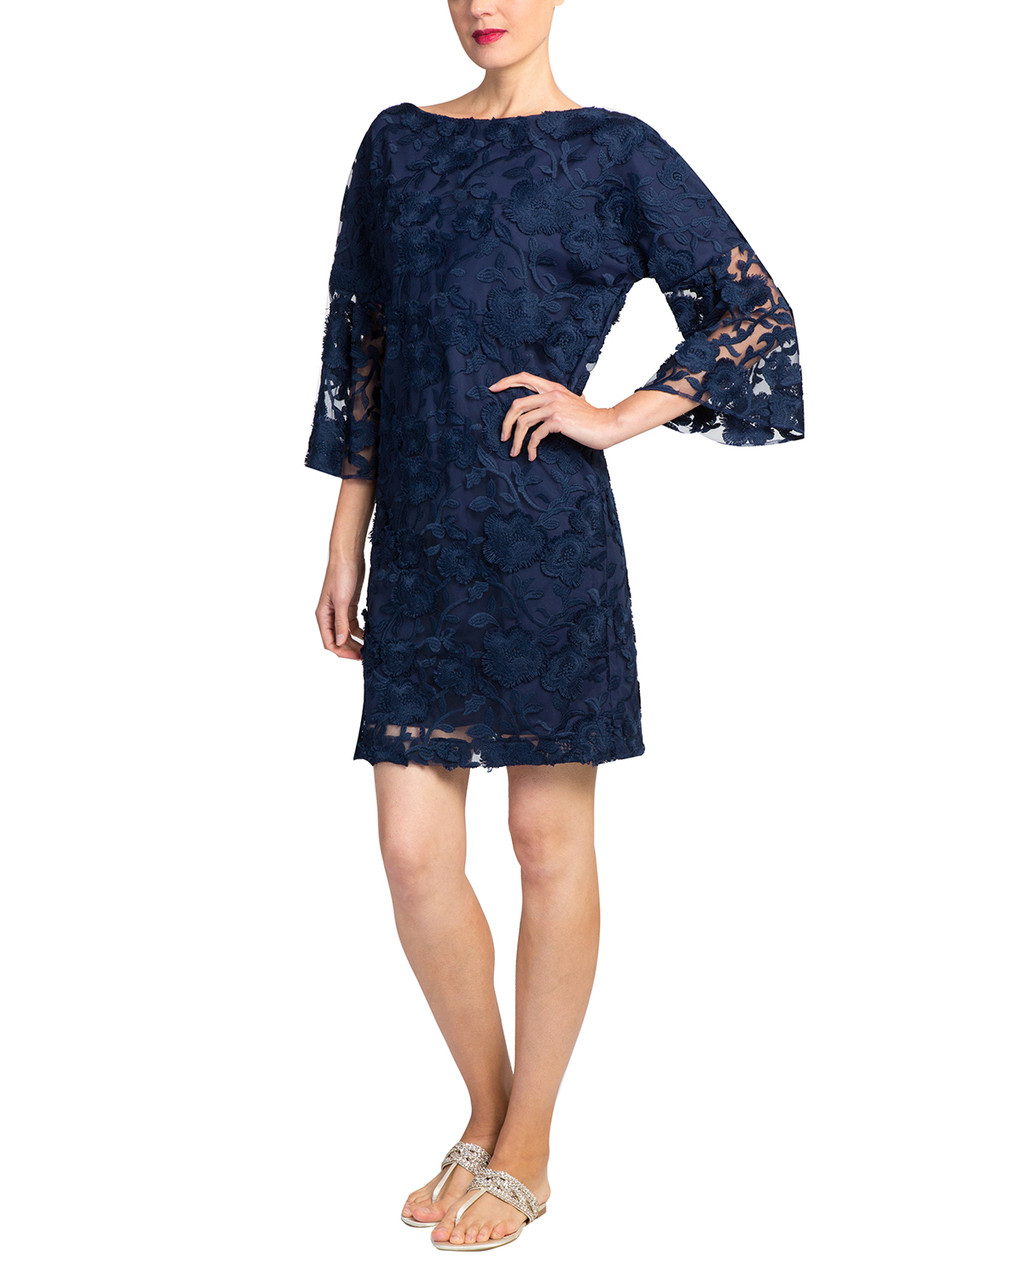 Lace bell sleeve day dress by Badgley Mischka